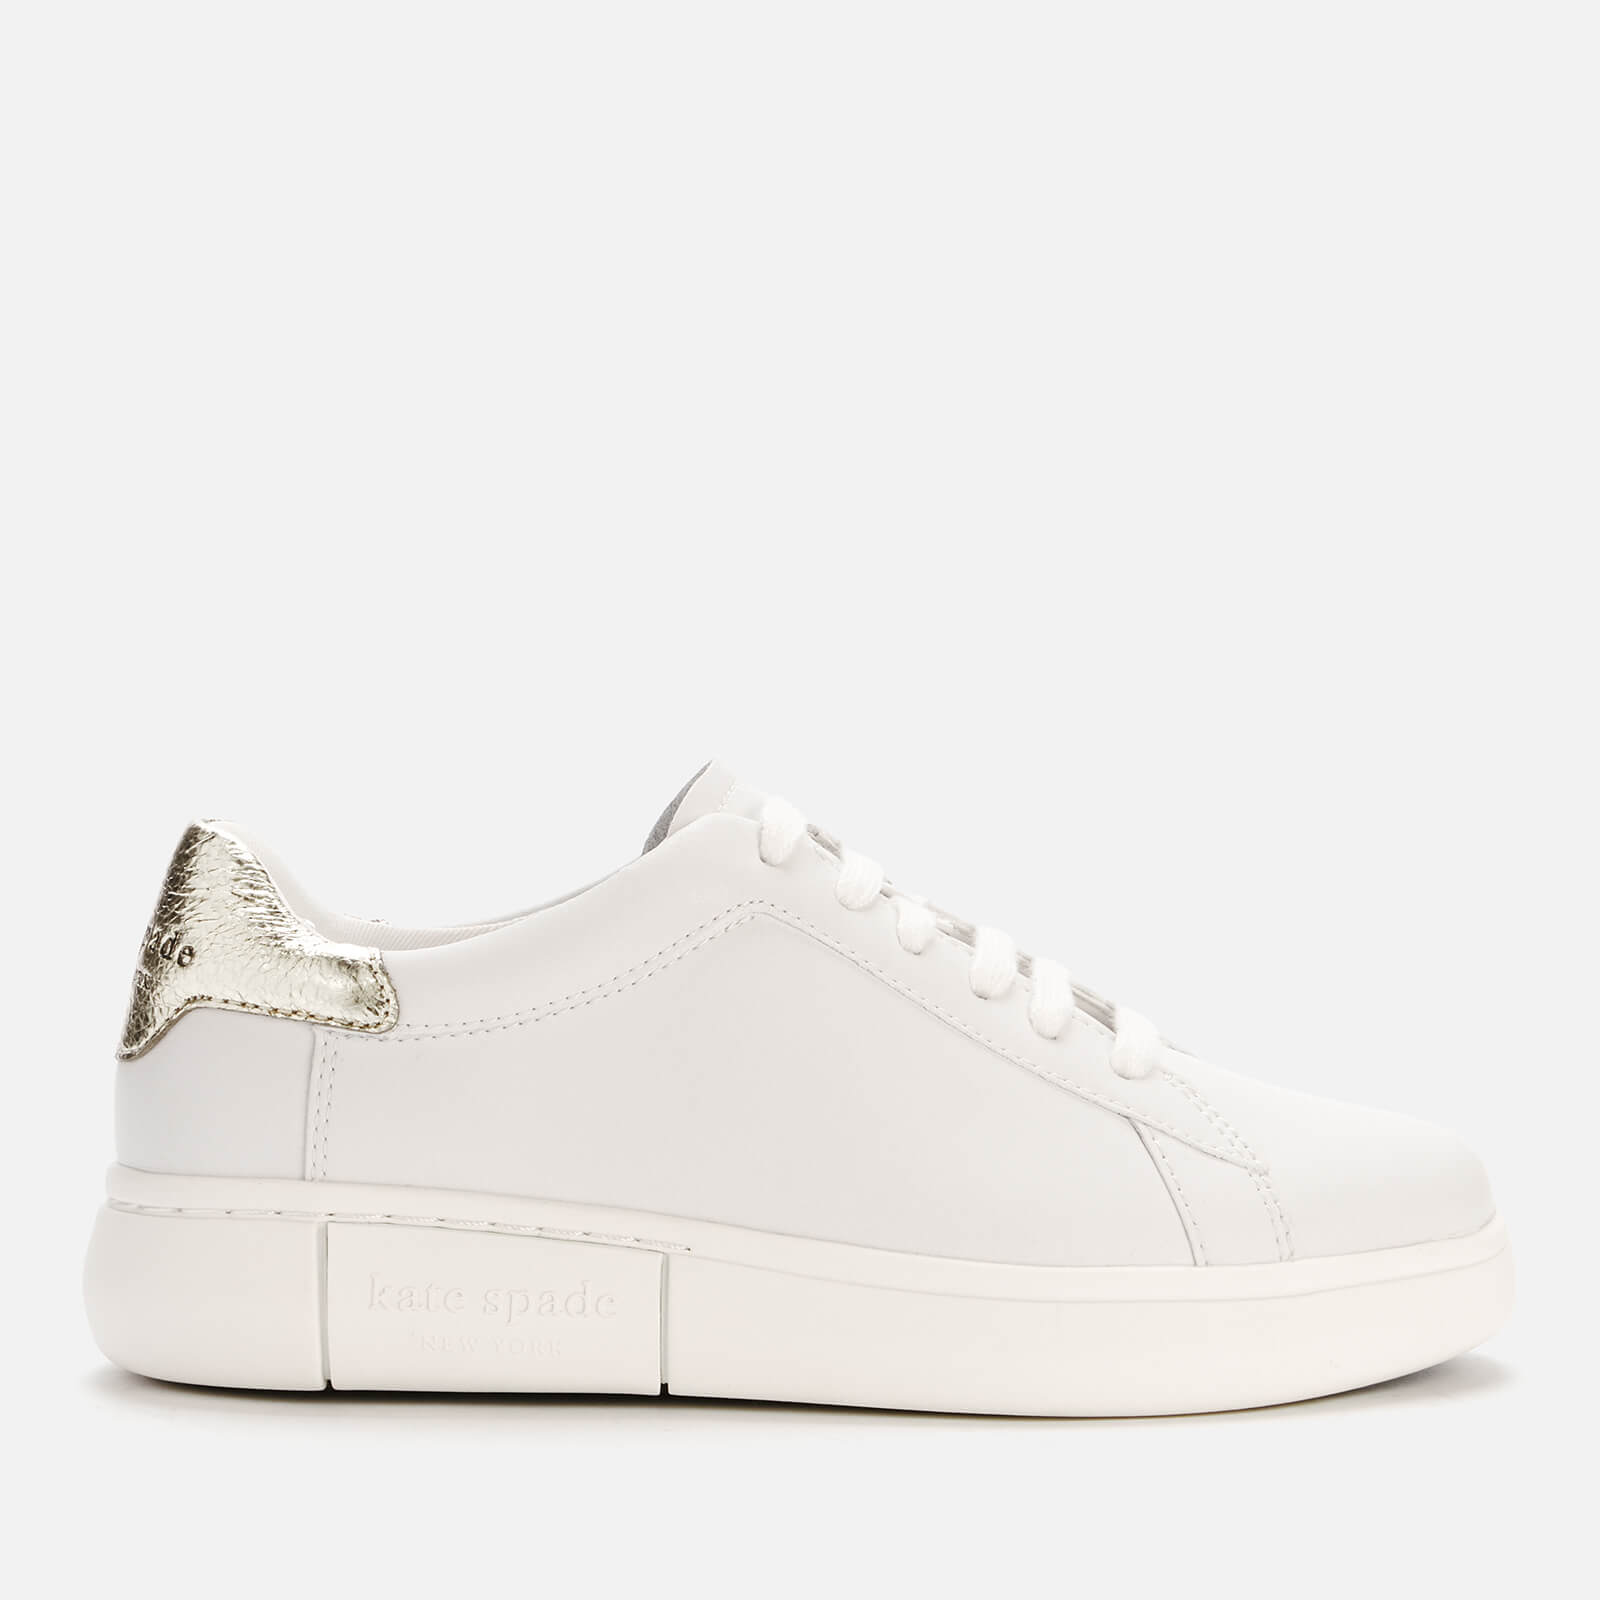 Kate Spade New York Women's Lift Leather Cupsole Trainers - Optic White/Pale Gold - UK 6